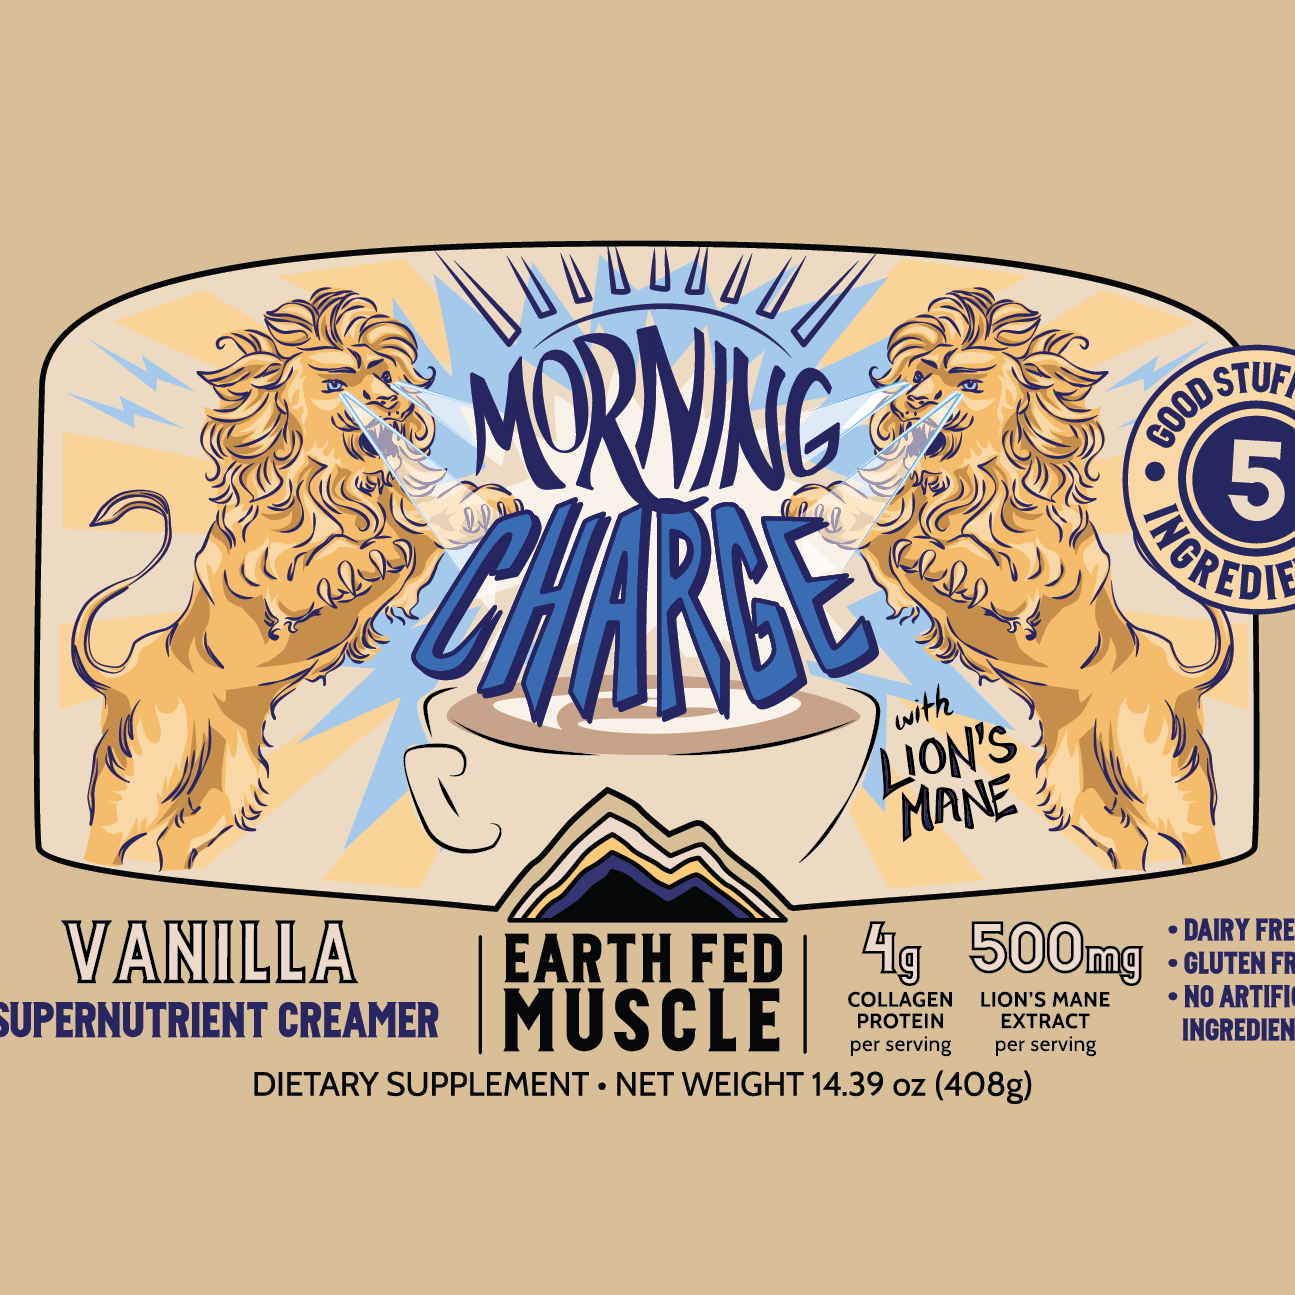 Morning Charge Supernutrient Creamer with Lion’s Mane